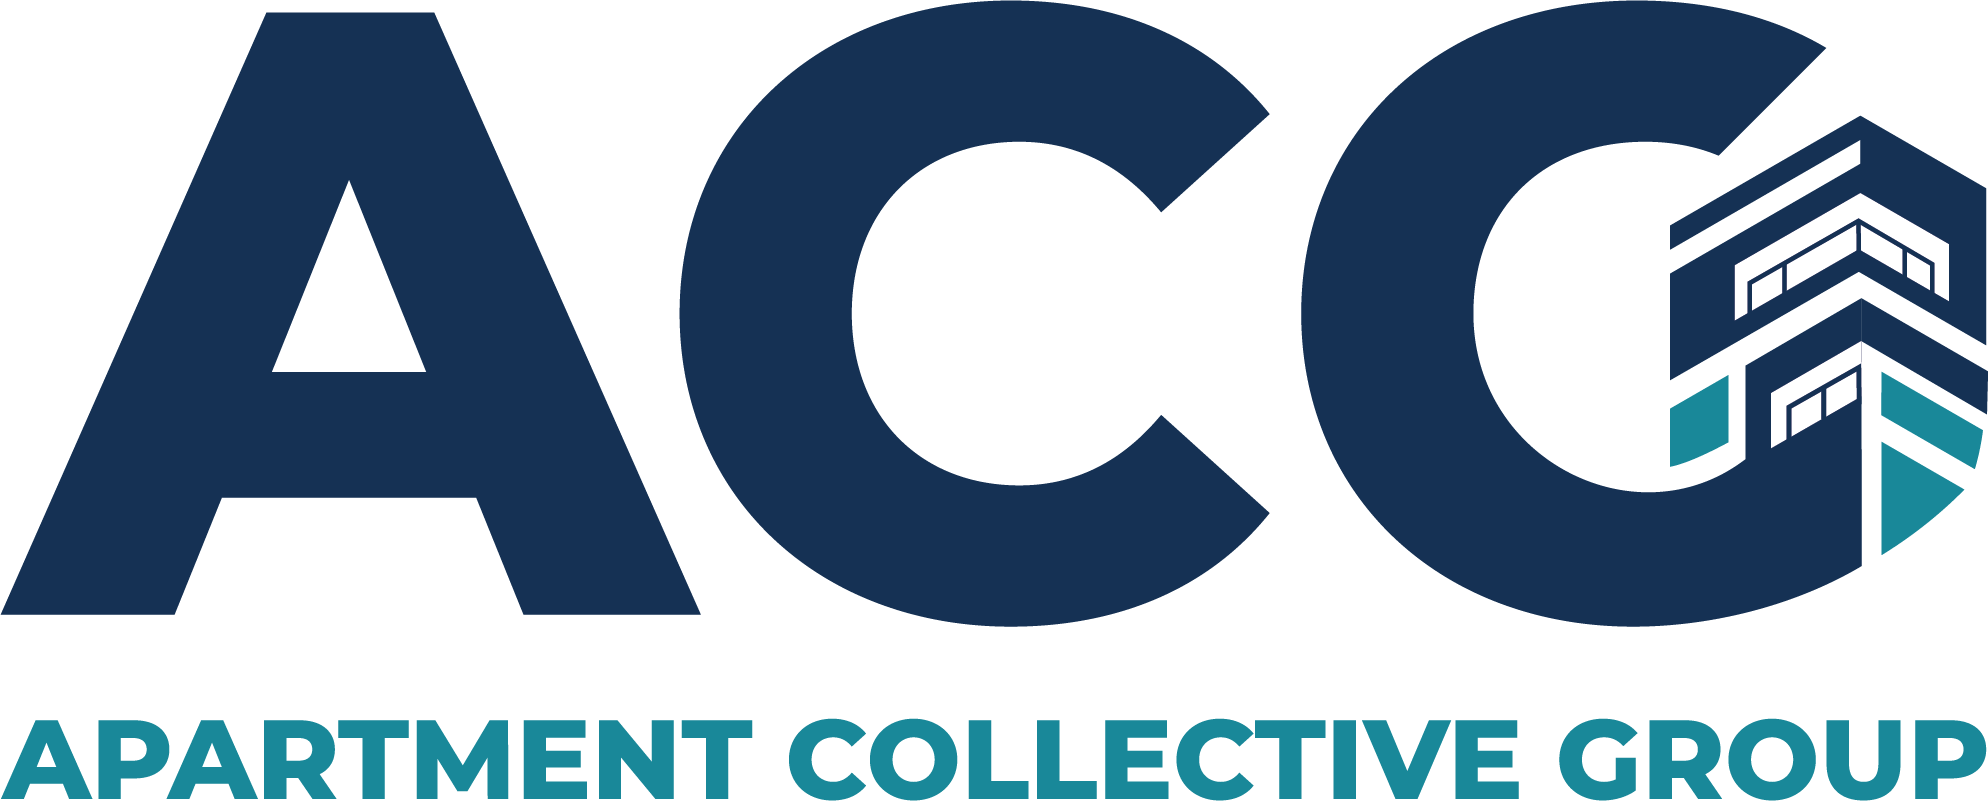 Apartment Collective Group